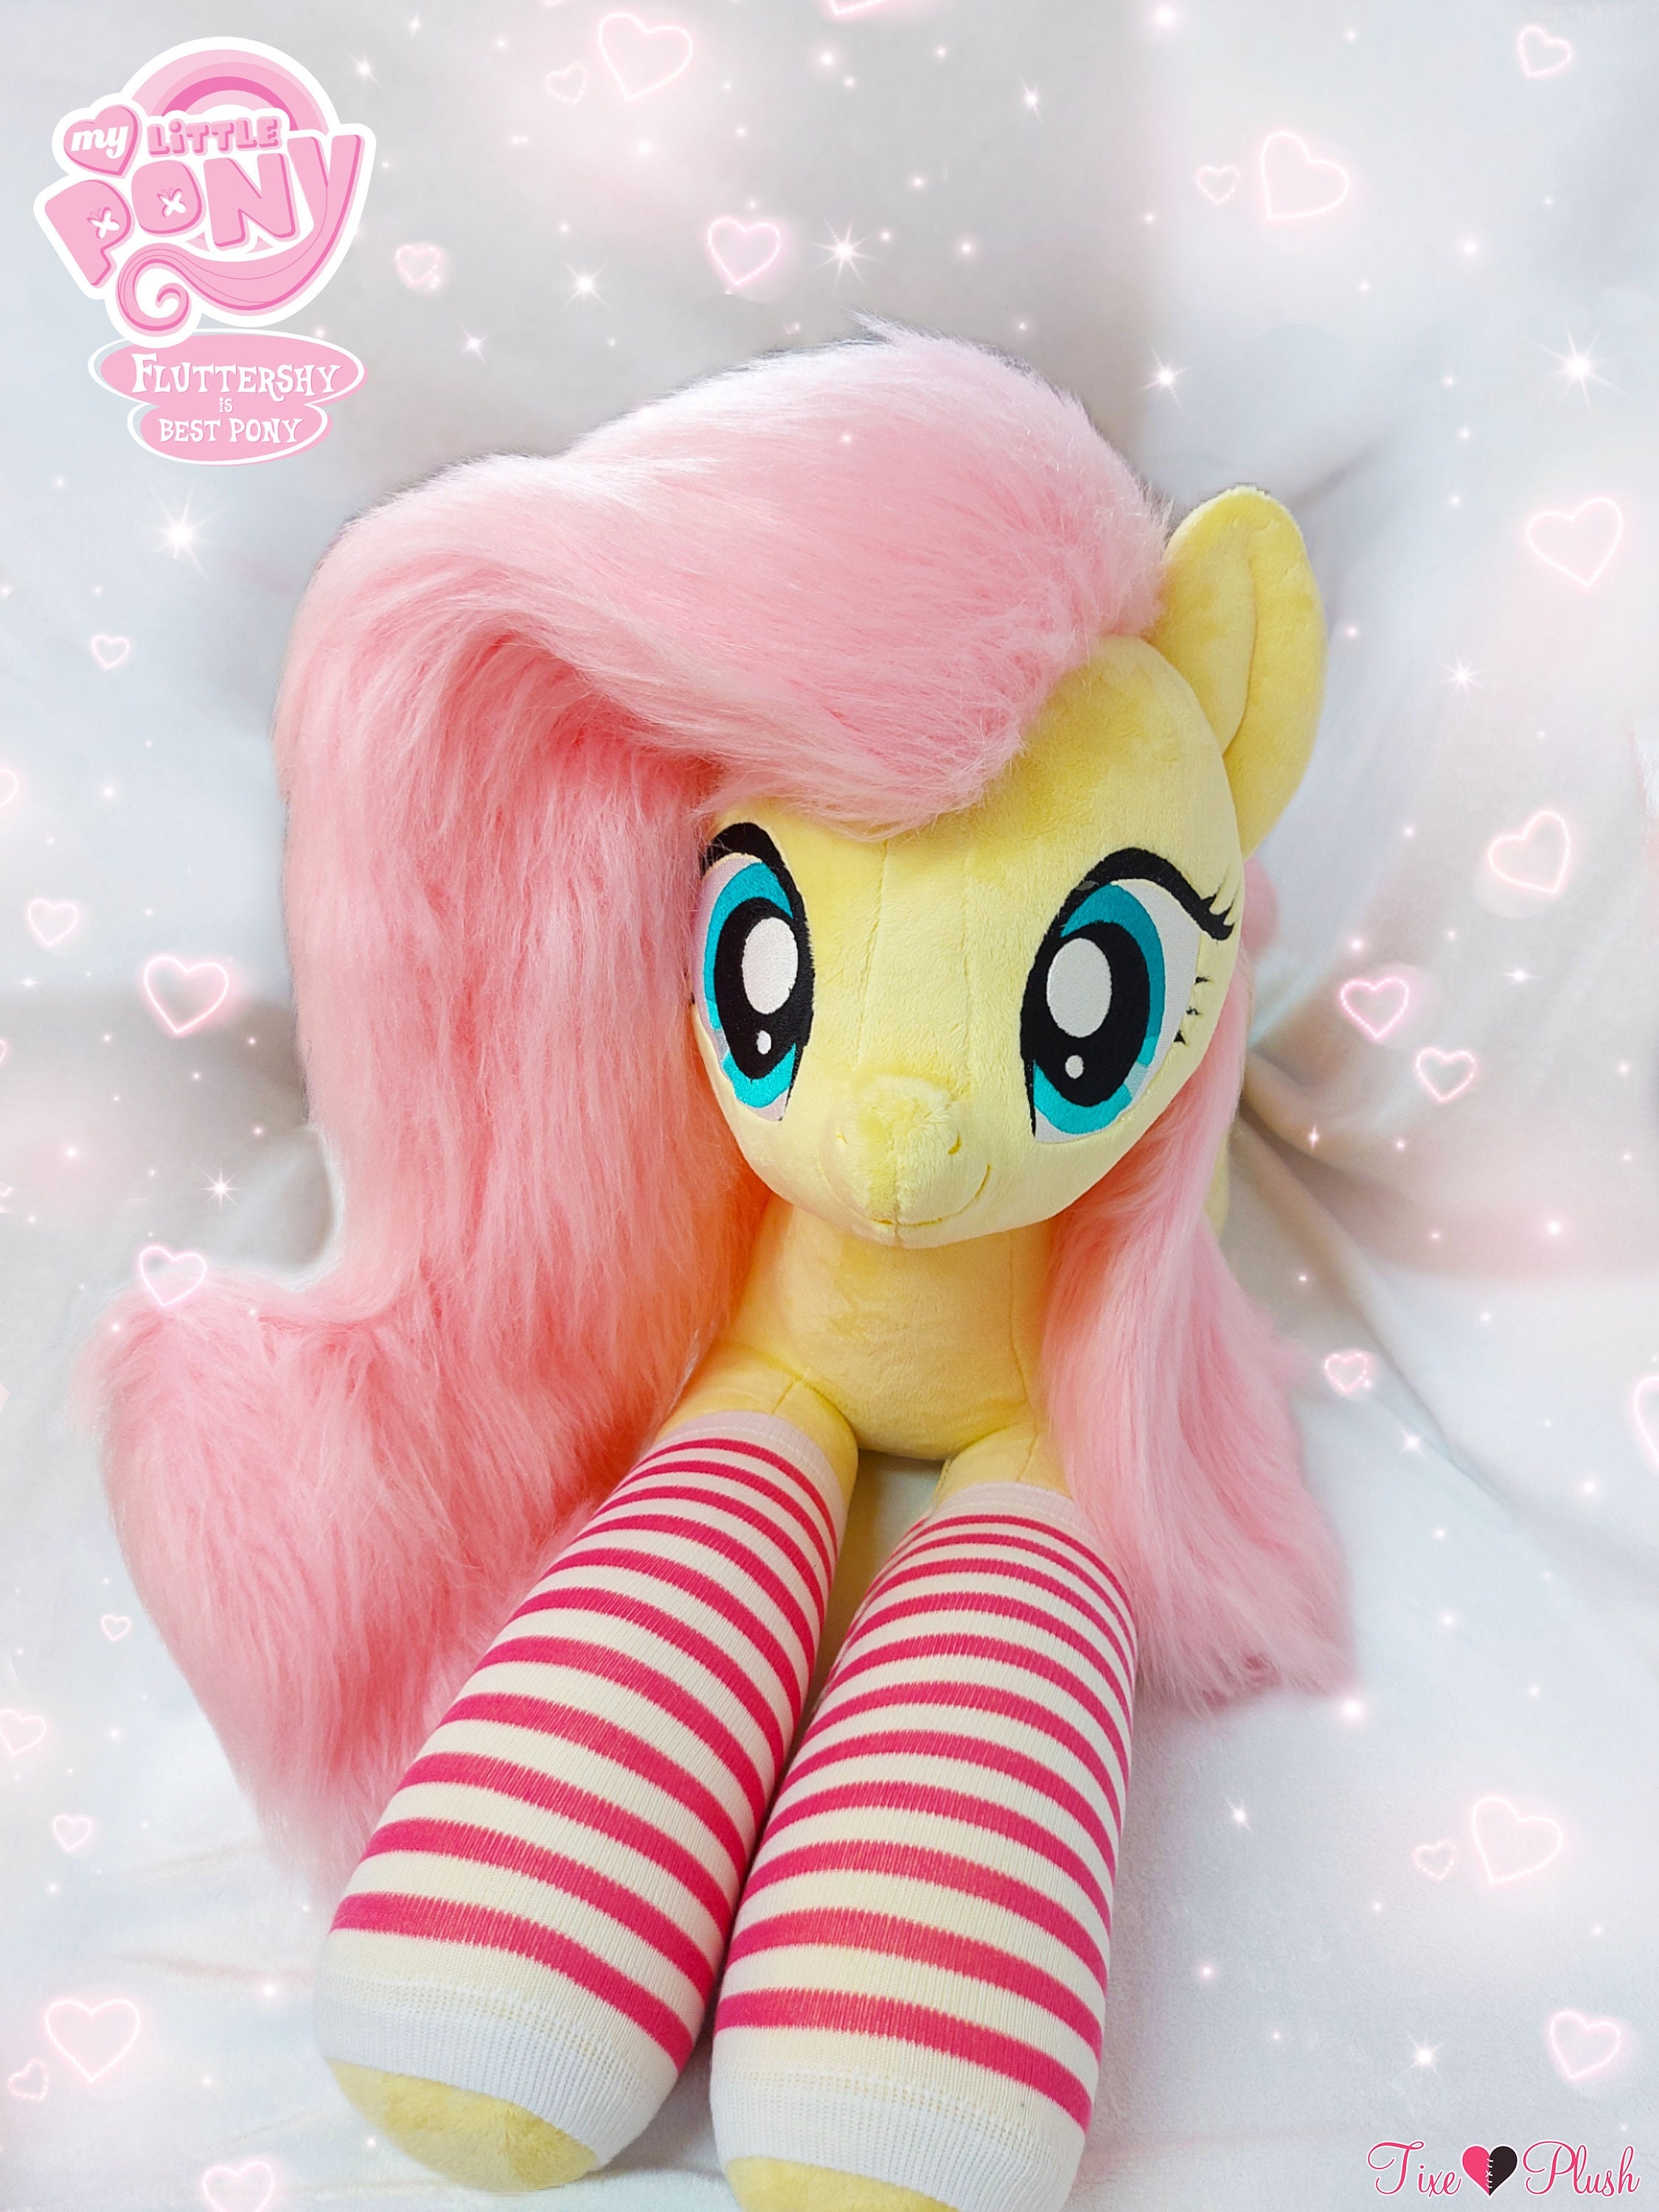 My Little Pony Toys Princess Pipp Petals Style of the Day Fashion Doll Toy  for Girls, Boys - My Little Pony